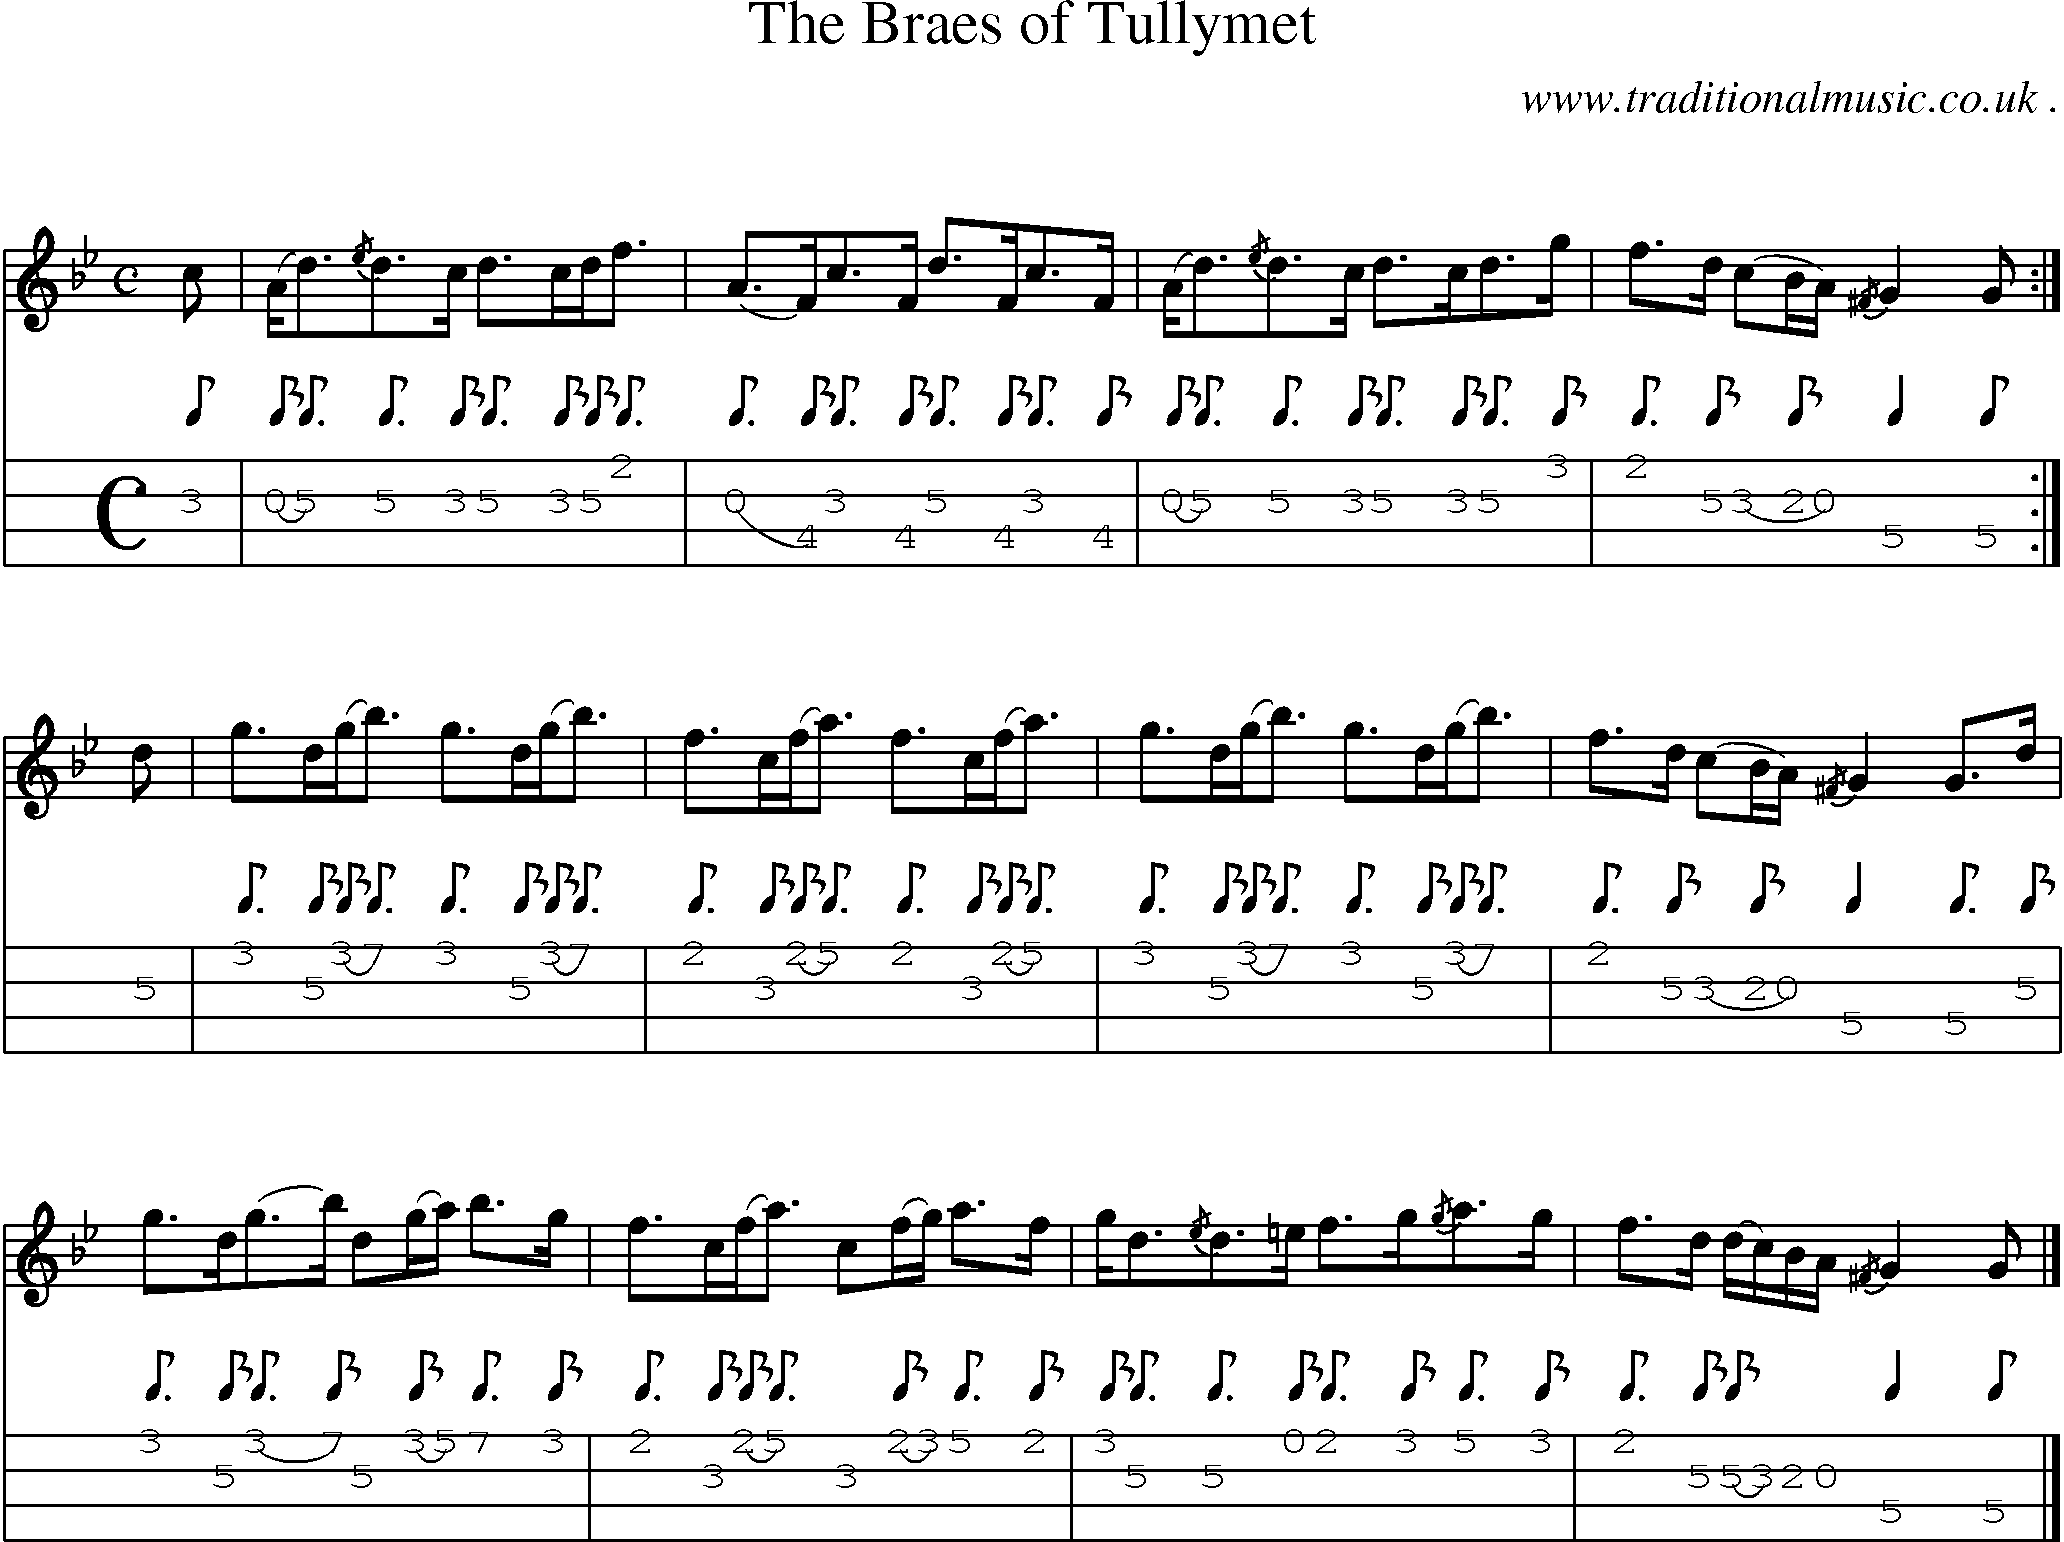 Sheet-music  score, Chords and Mandolin Tabs for The Braes Of Tullymet